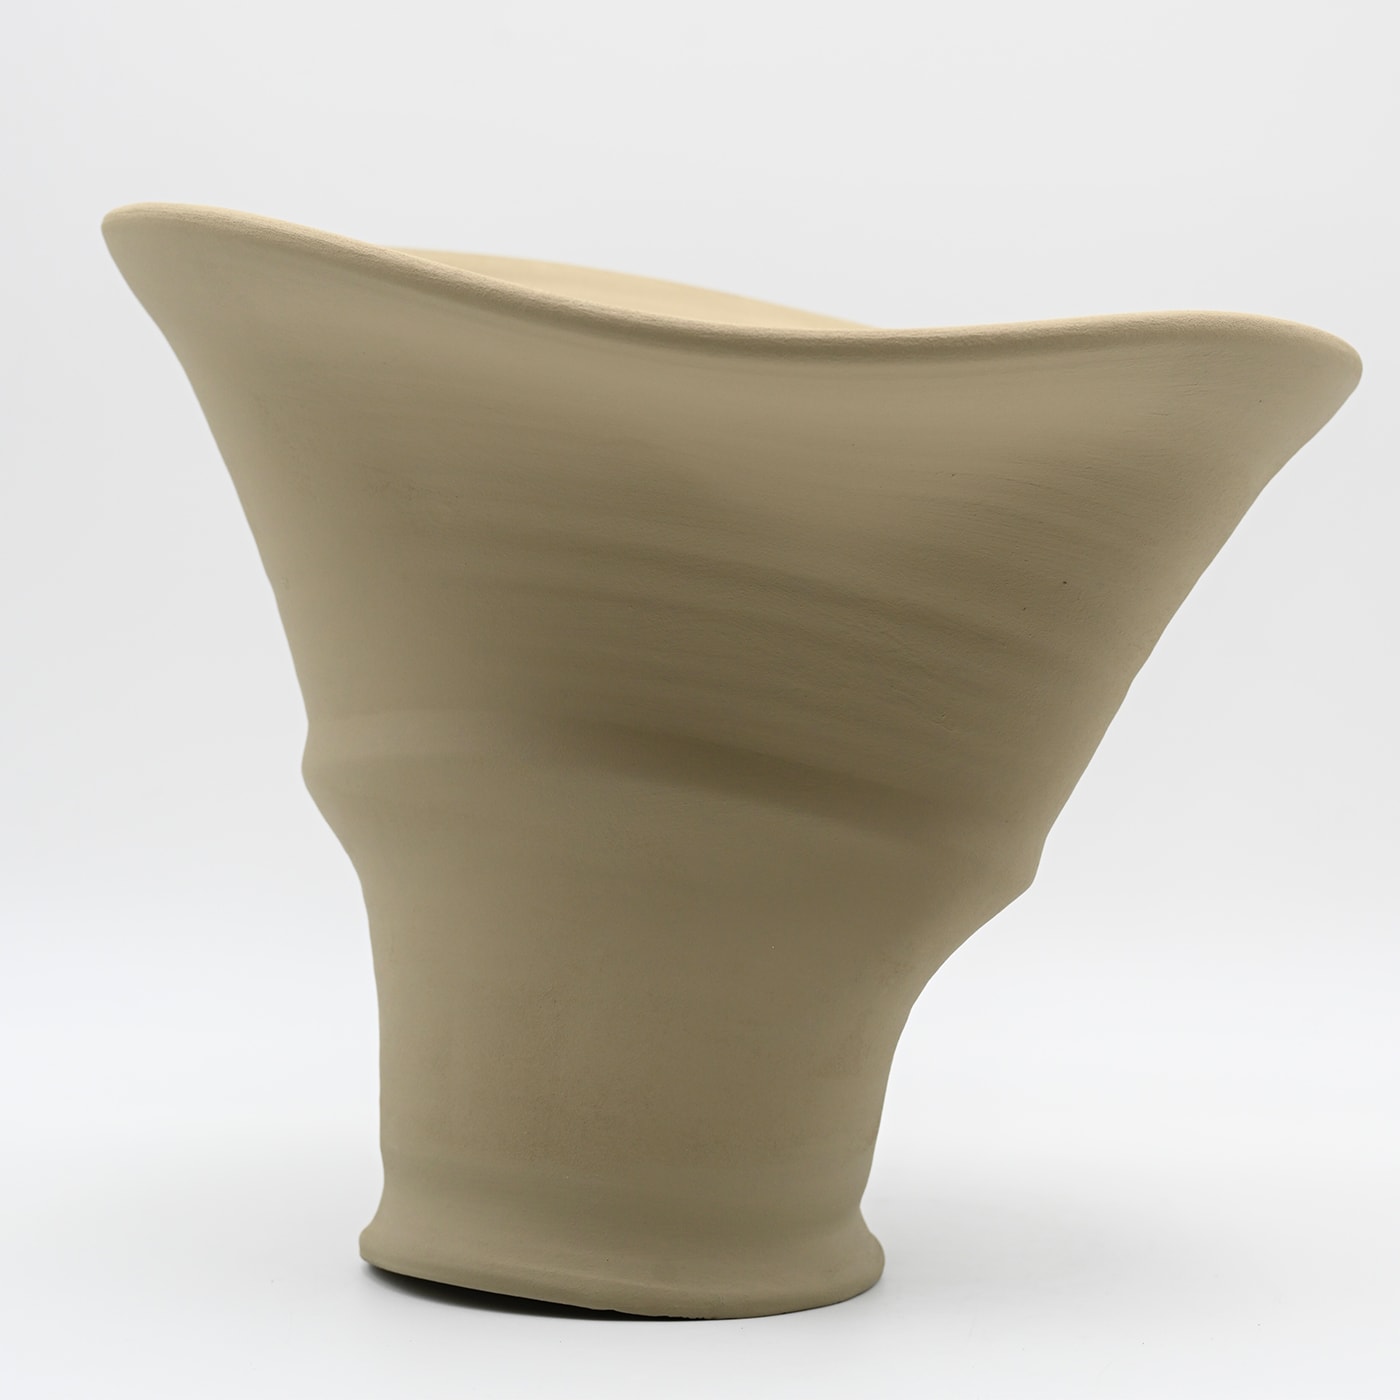 Ivory Luxury Handcrafted Vase from Italy